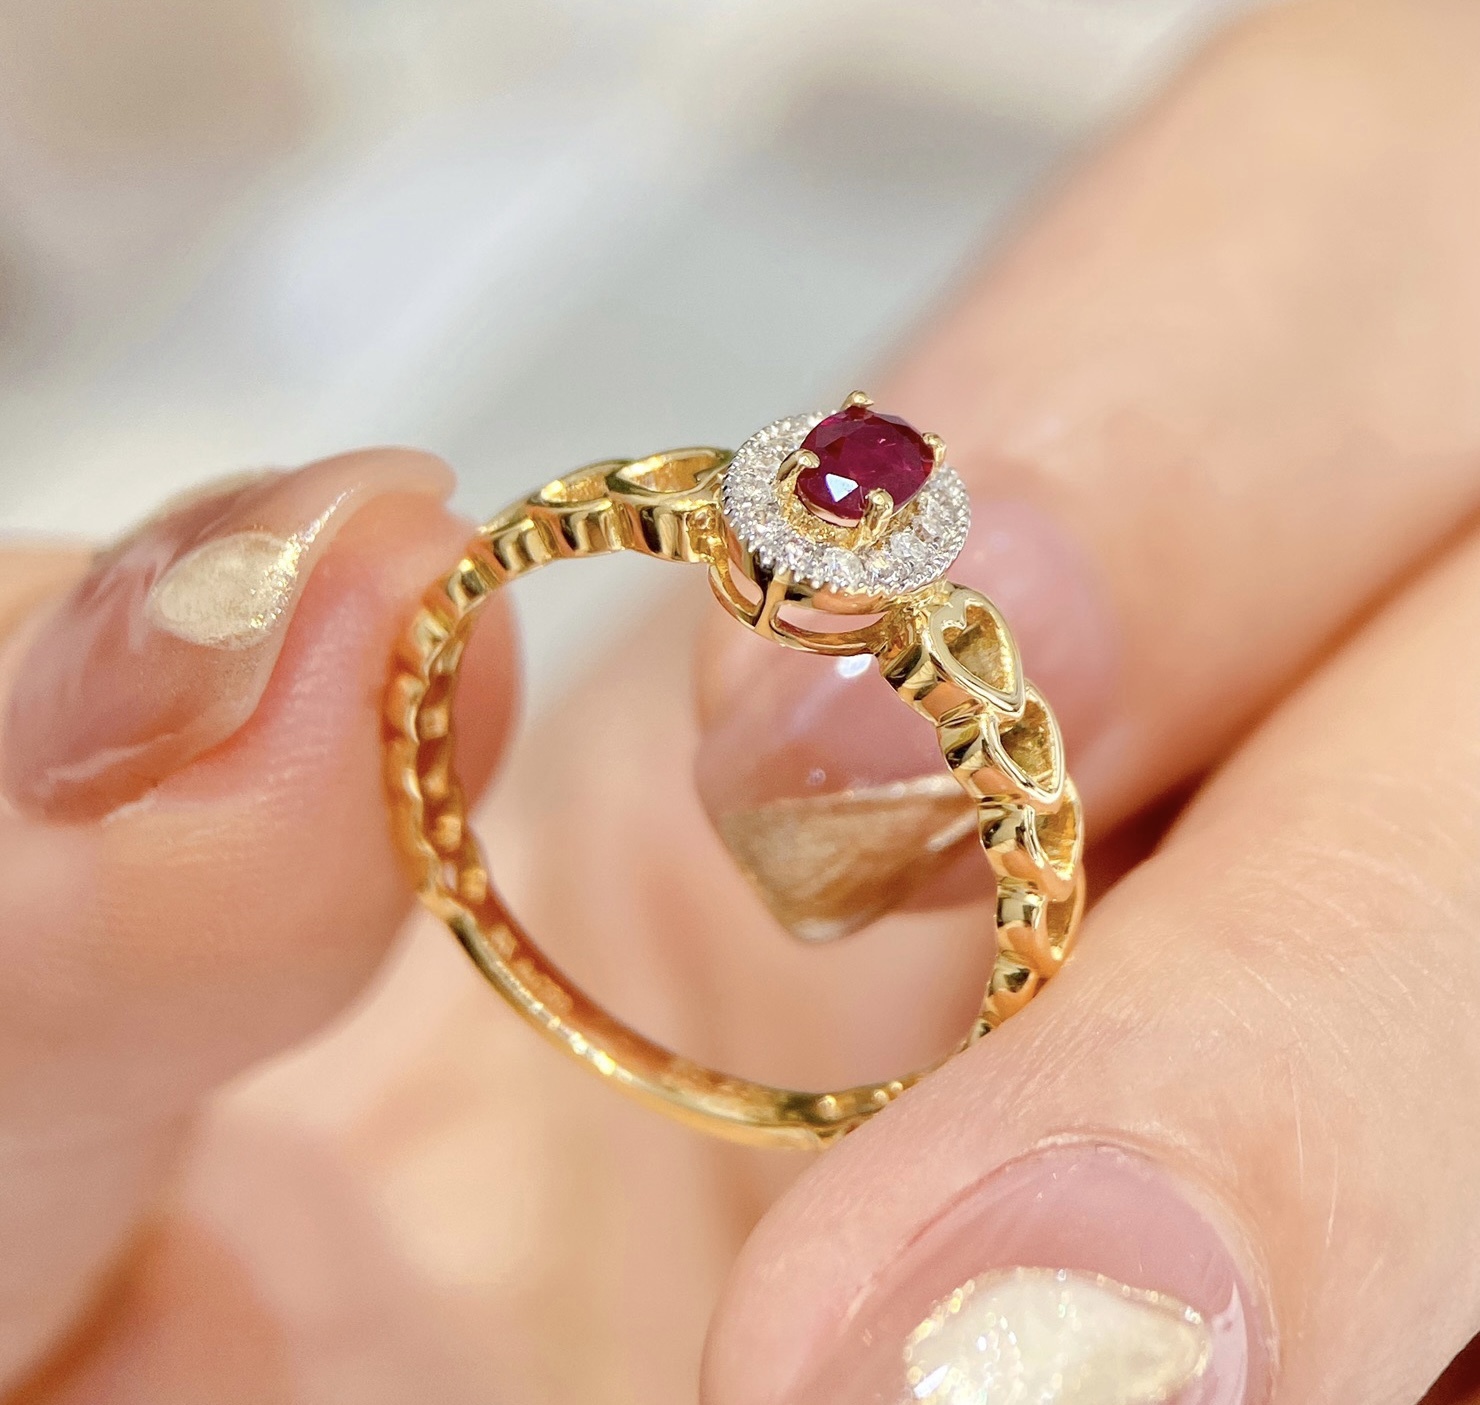 Vintage Ring Ruby Swarovski Crystal Double Heart Ring 18k Gold Antique  Womans Handmade Jewelry R2342